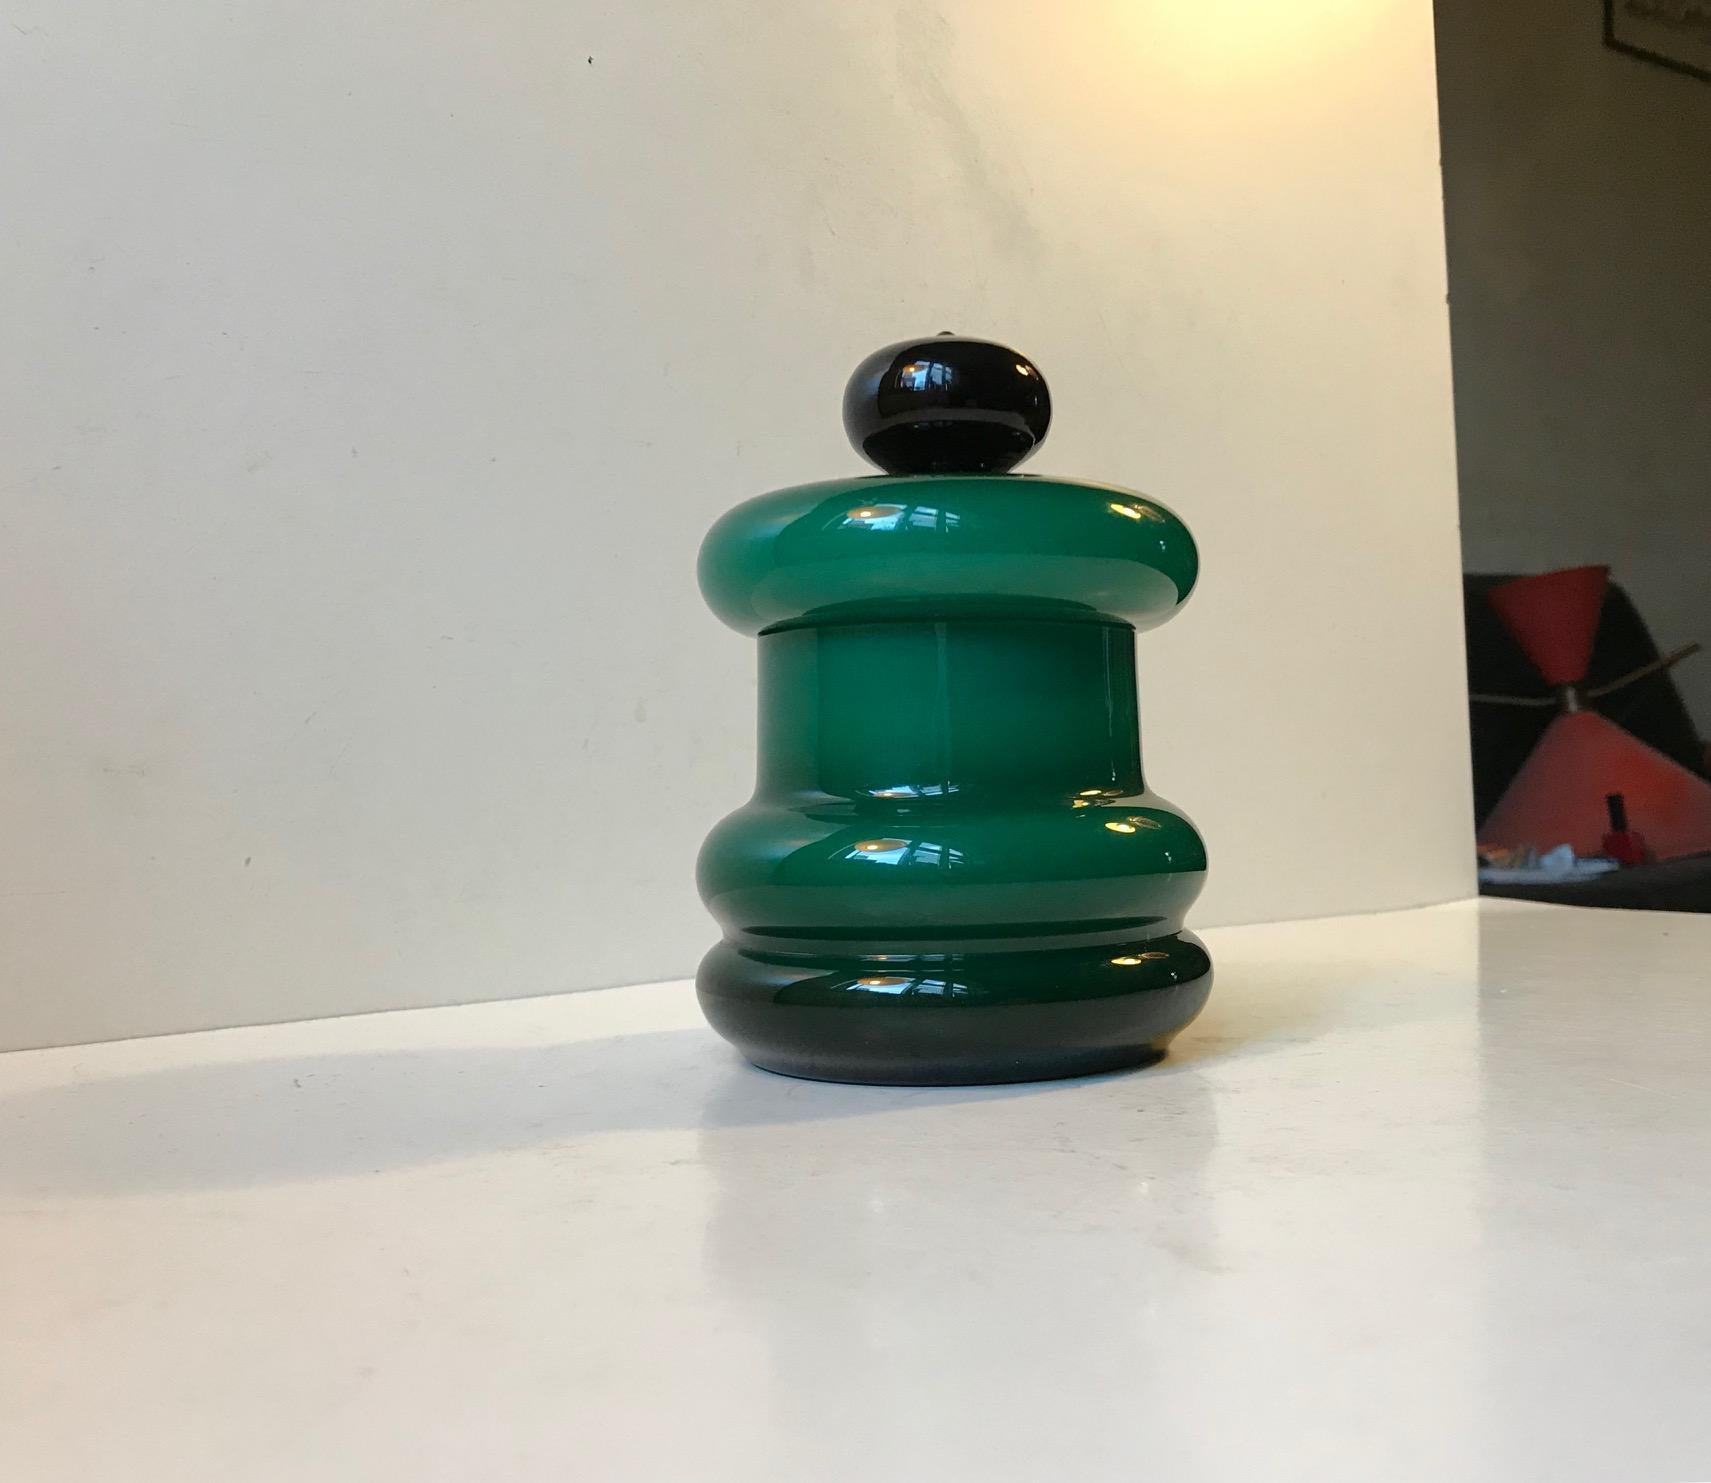 Hooped in shape this emerald-colored lidded jar or trinket was manufactured and designed at Empoli in Italy during the late 1950s or early 1960s. It is composed of a cased outer glass that varies in tone according to the curves of its shape. It's